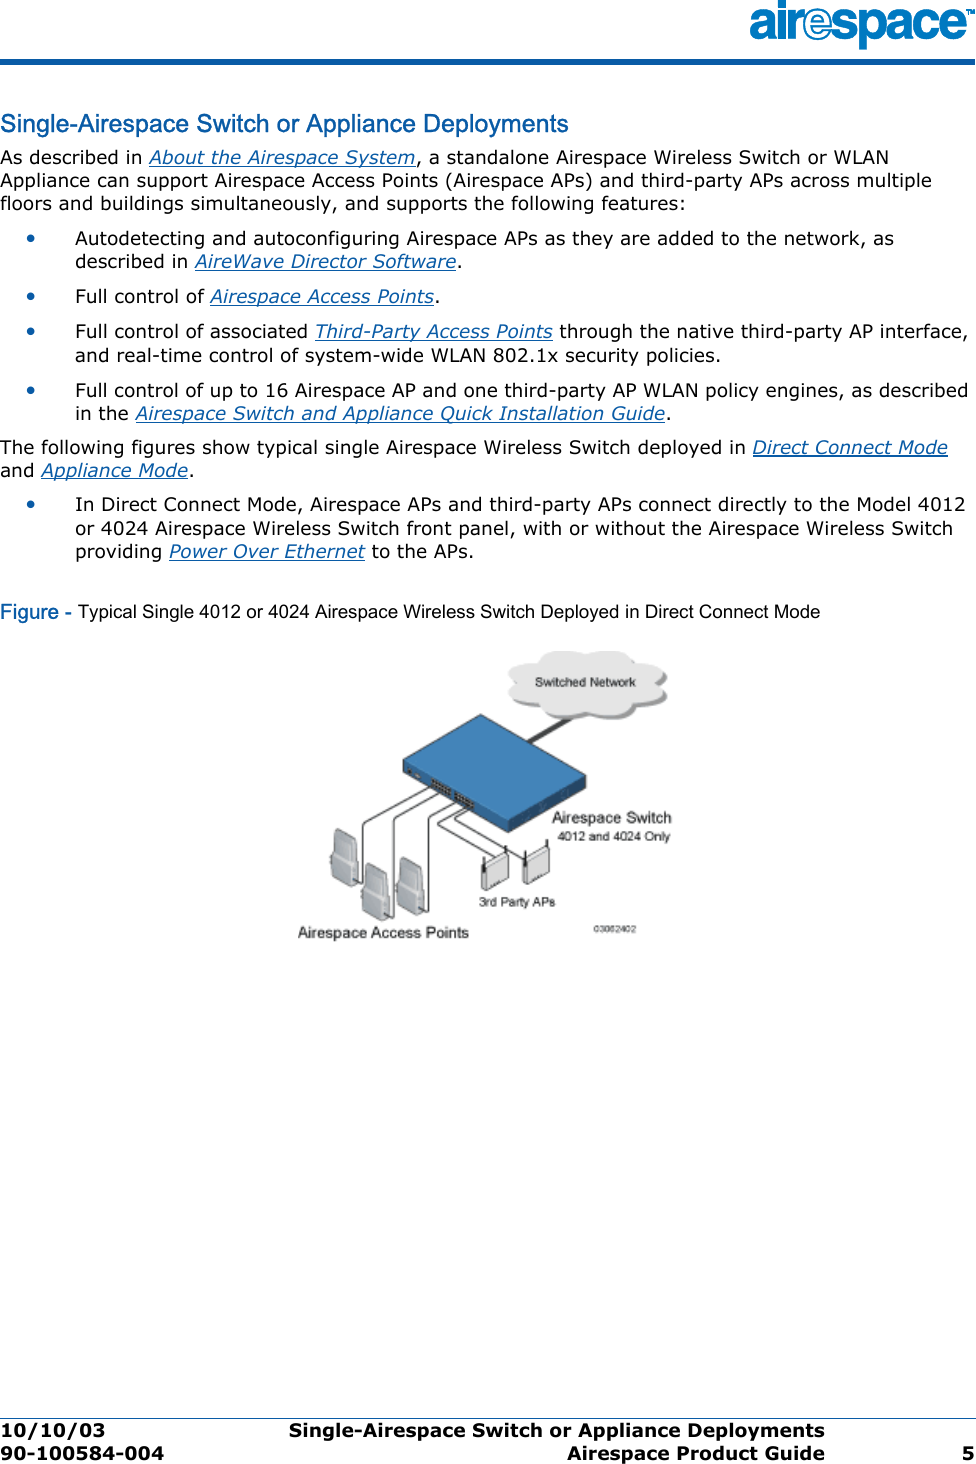 10/10/03 Single-Airespace Switch or Appliance Deployments  90-100584-004 Airespace Product Guide 5Single-Airespace Switch or Appliance DeploymentsSingle-Airespace S witch or Appliance Deploy mentsAs described in About the Airespace System, a standalone Airespace Wireless Switch or WLAN Appliance can support Airespace Access Points (Airespace APs) and third-party APs across multiple floors and buildings simultaneously, and supports the following features:•Autodetecting and autoconfiguring Airespace APs as they are added to the network, as described in AireWave Director Software.•Full control of Airespace Access Points.•Full control of associated Third-Party Access Points through the native third-party AP interface, and real-time control of system-wide WLAN 802.1x security policies.•Full control of up to 16 Airespace AP and one third-party AP WLAN policy engines, as described in the Airespace Switch and Appliance Quick Installation Guide.The following figures show typical single Airespace Wireless Switch deployed in Direct Connect Mode and Appliance Mode. •In Direct Connect Mode, Airespace APs and third-party APs connect directly to the Model 4012 or 4024 Airespace Wireless Switch front panel, with or without the Airespace Wireless Switch providing Power Over Ethernet to the APs. Figure - Typical Single 4012 or 4024 Airespace Wireless Switch Deployed in Direct Connect Mode